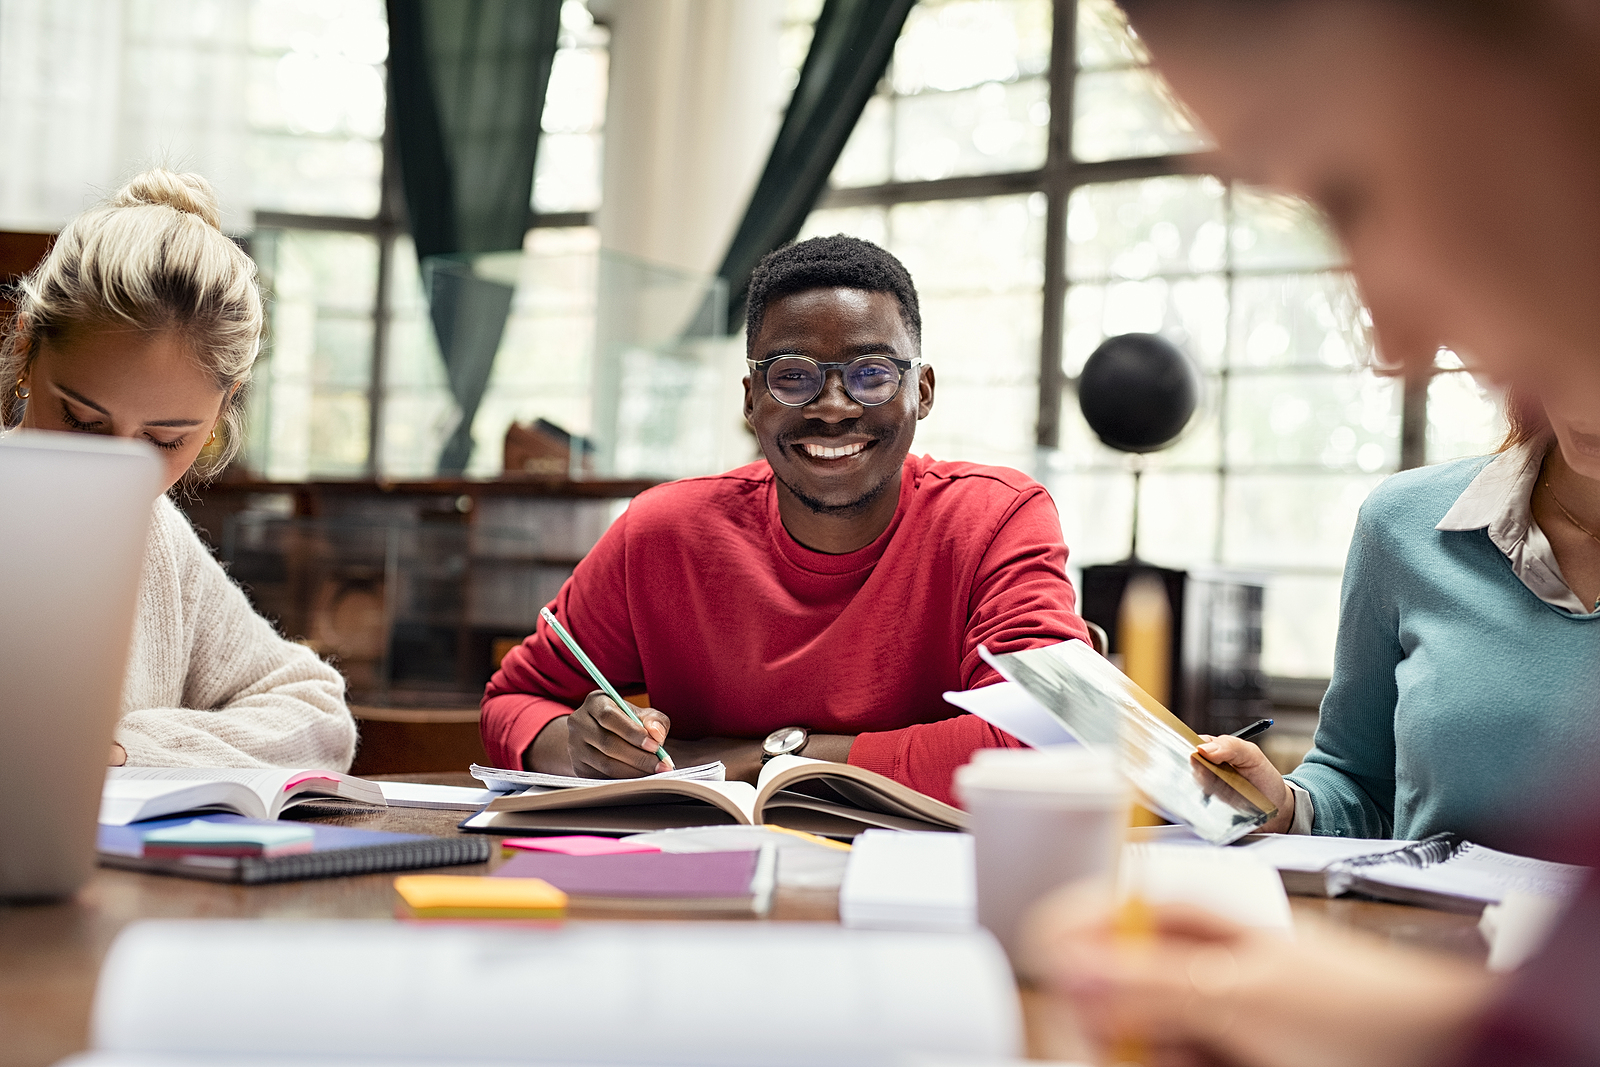 Image of a young black man smiling and writing on a journal next to other classmates doing the same.